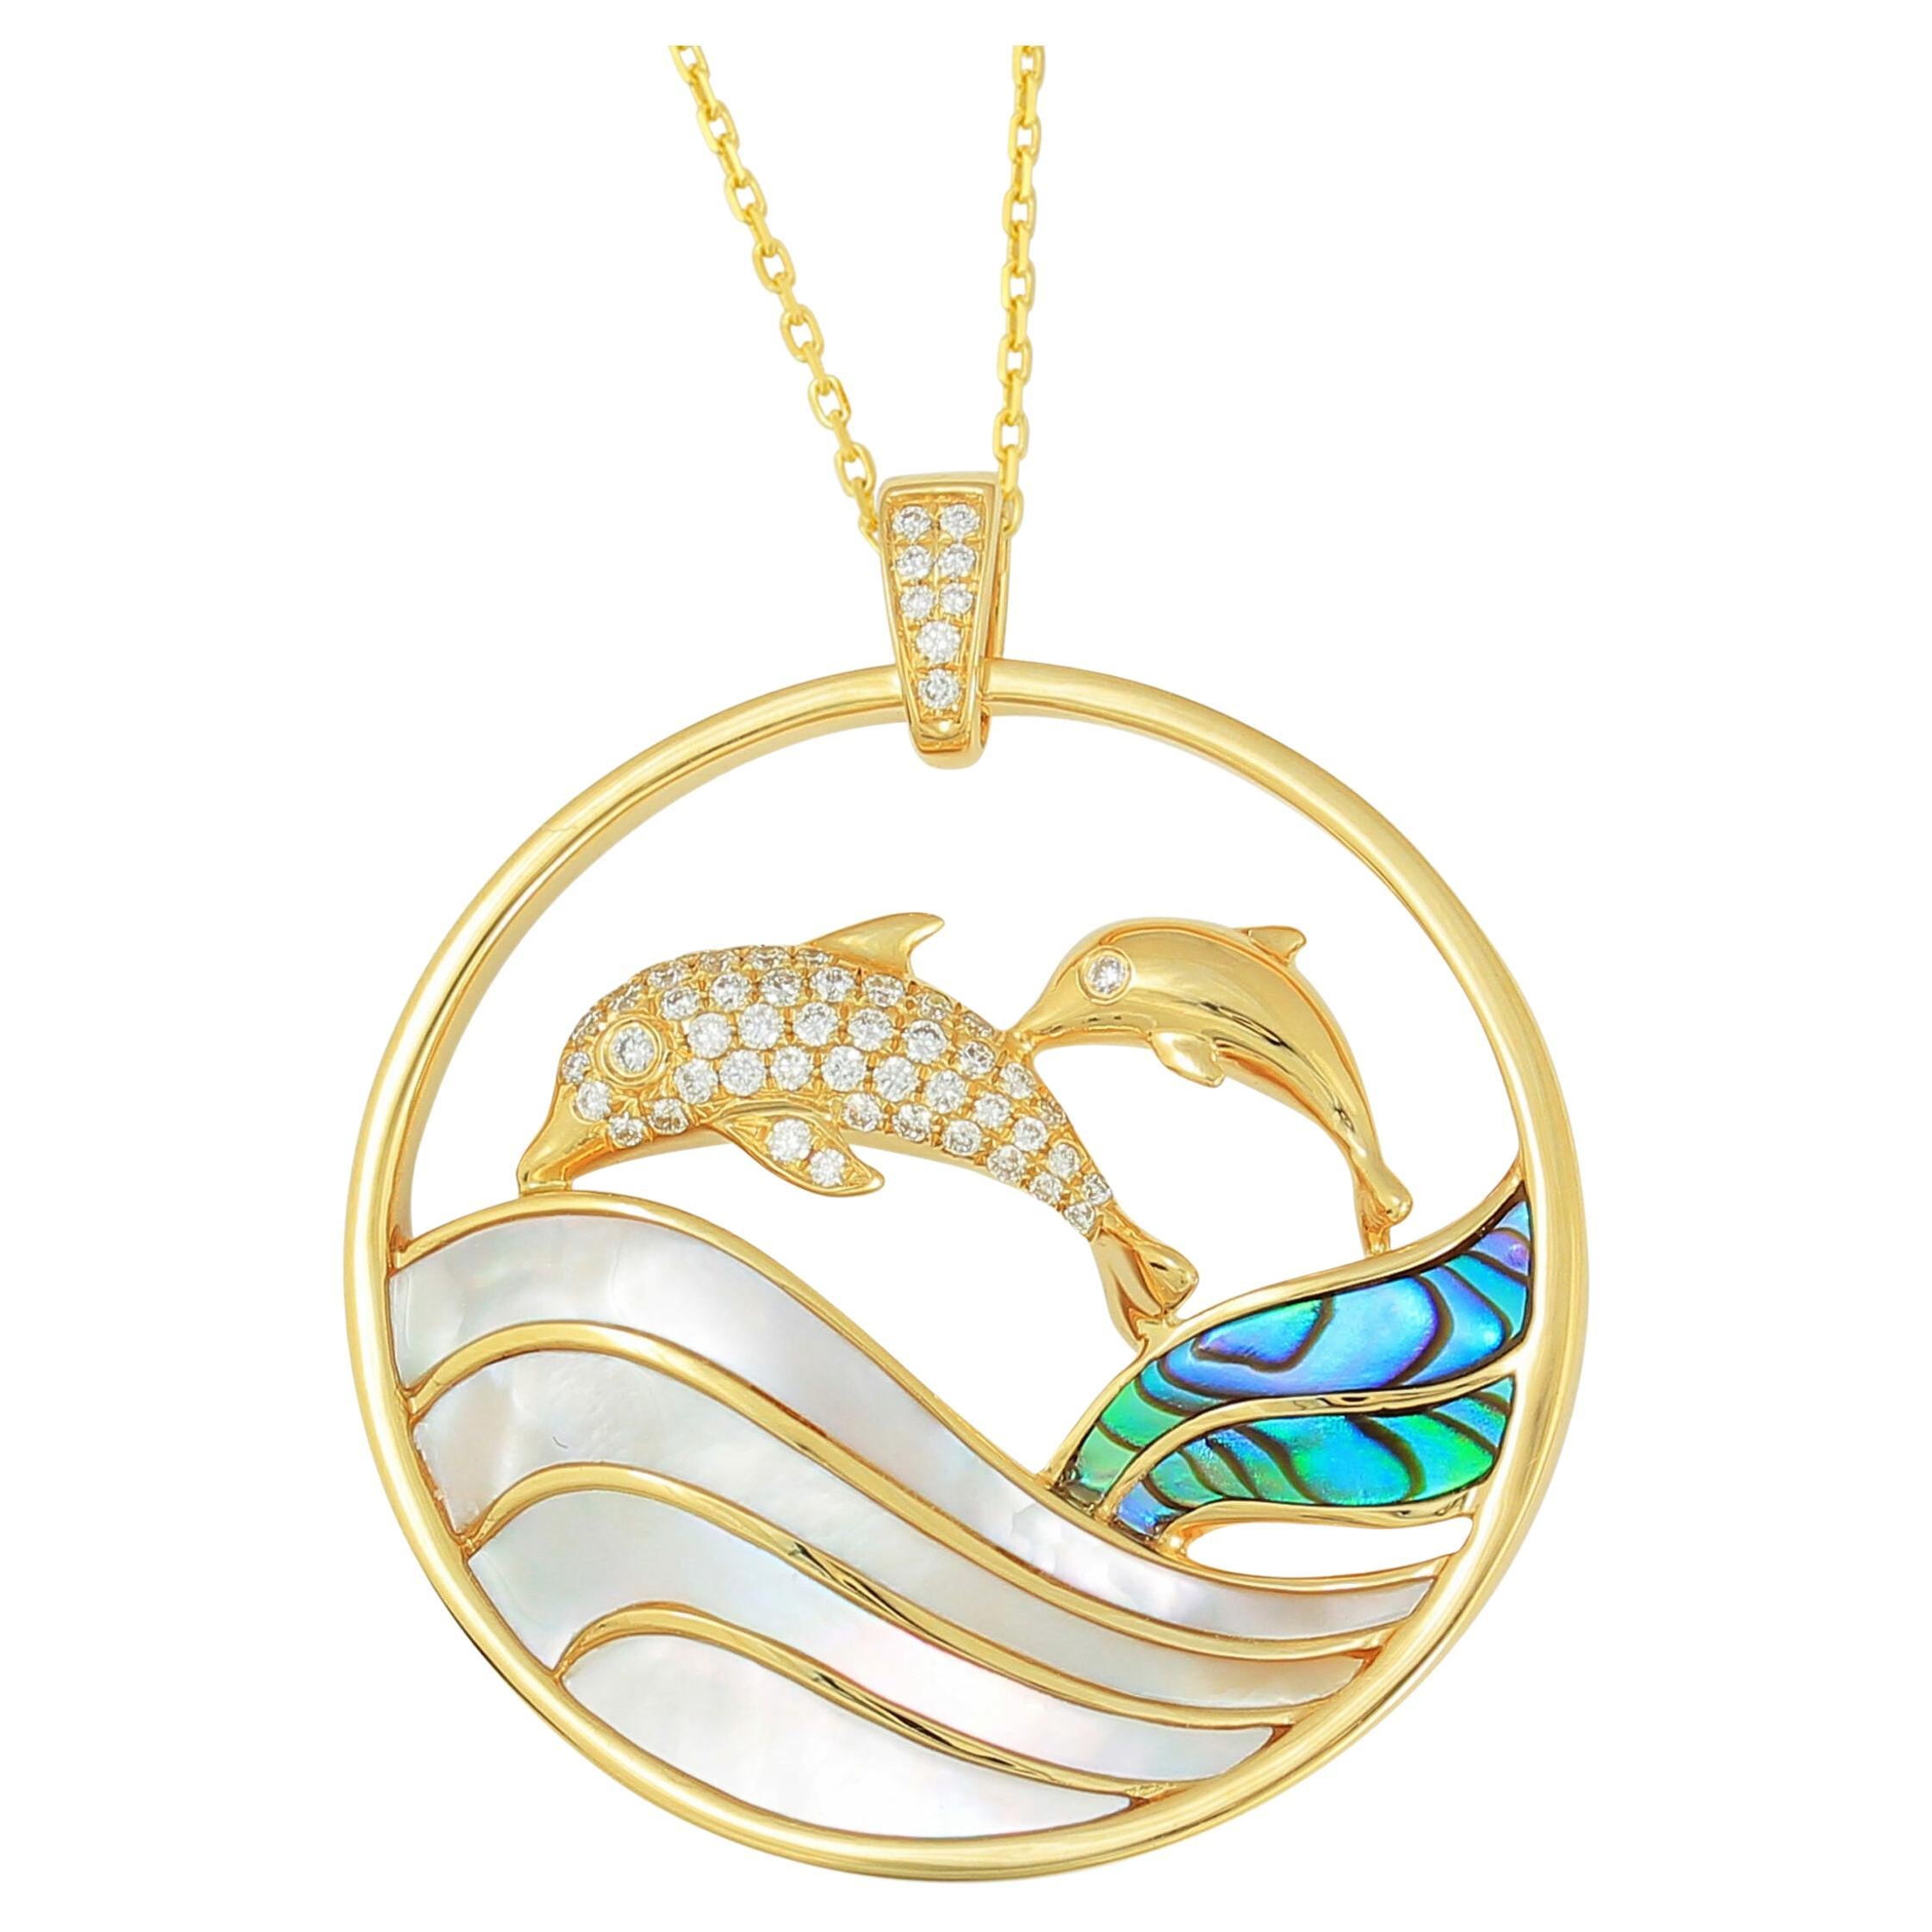 Frederic Sage Large “Dolphin” Pendant For Sale